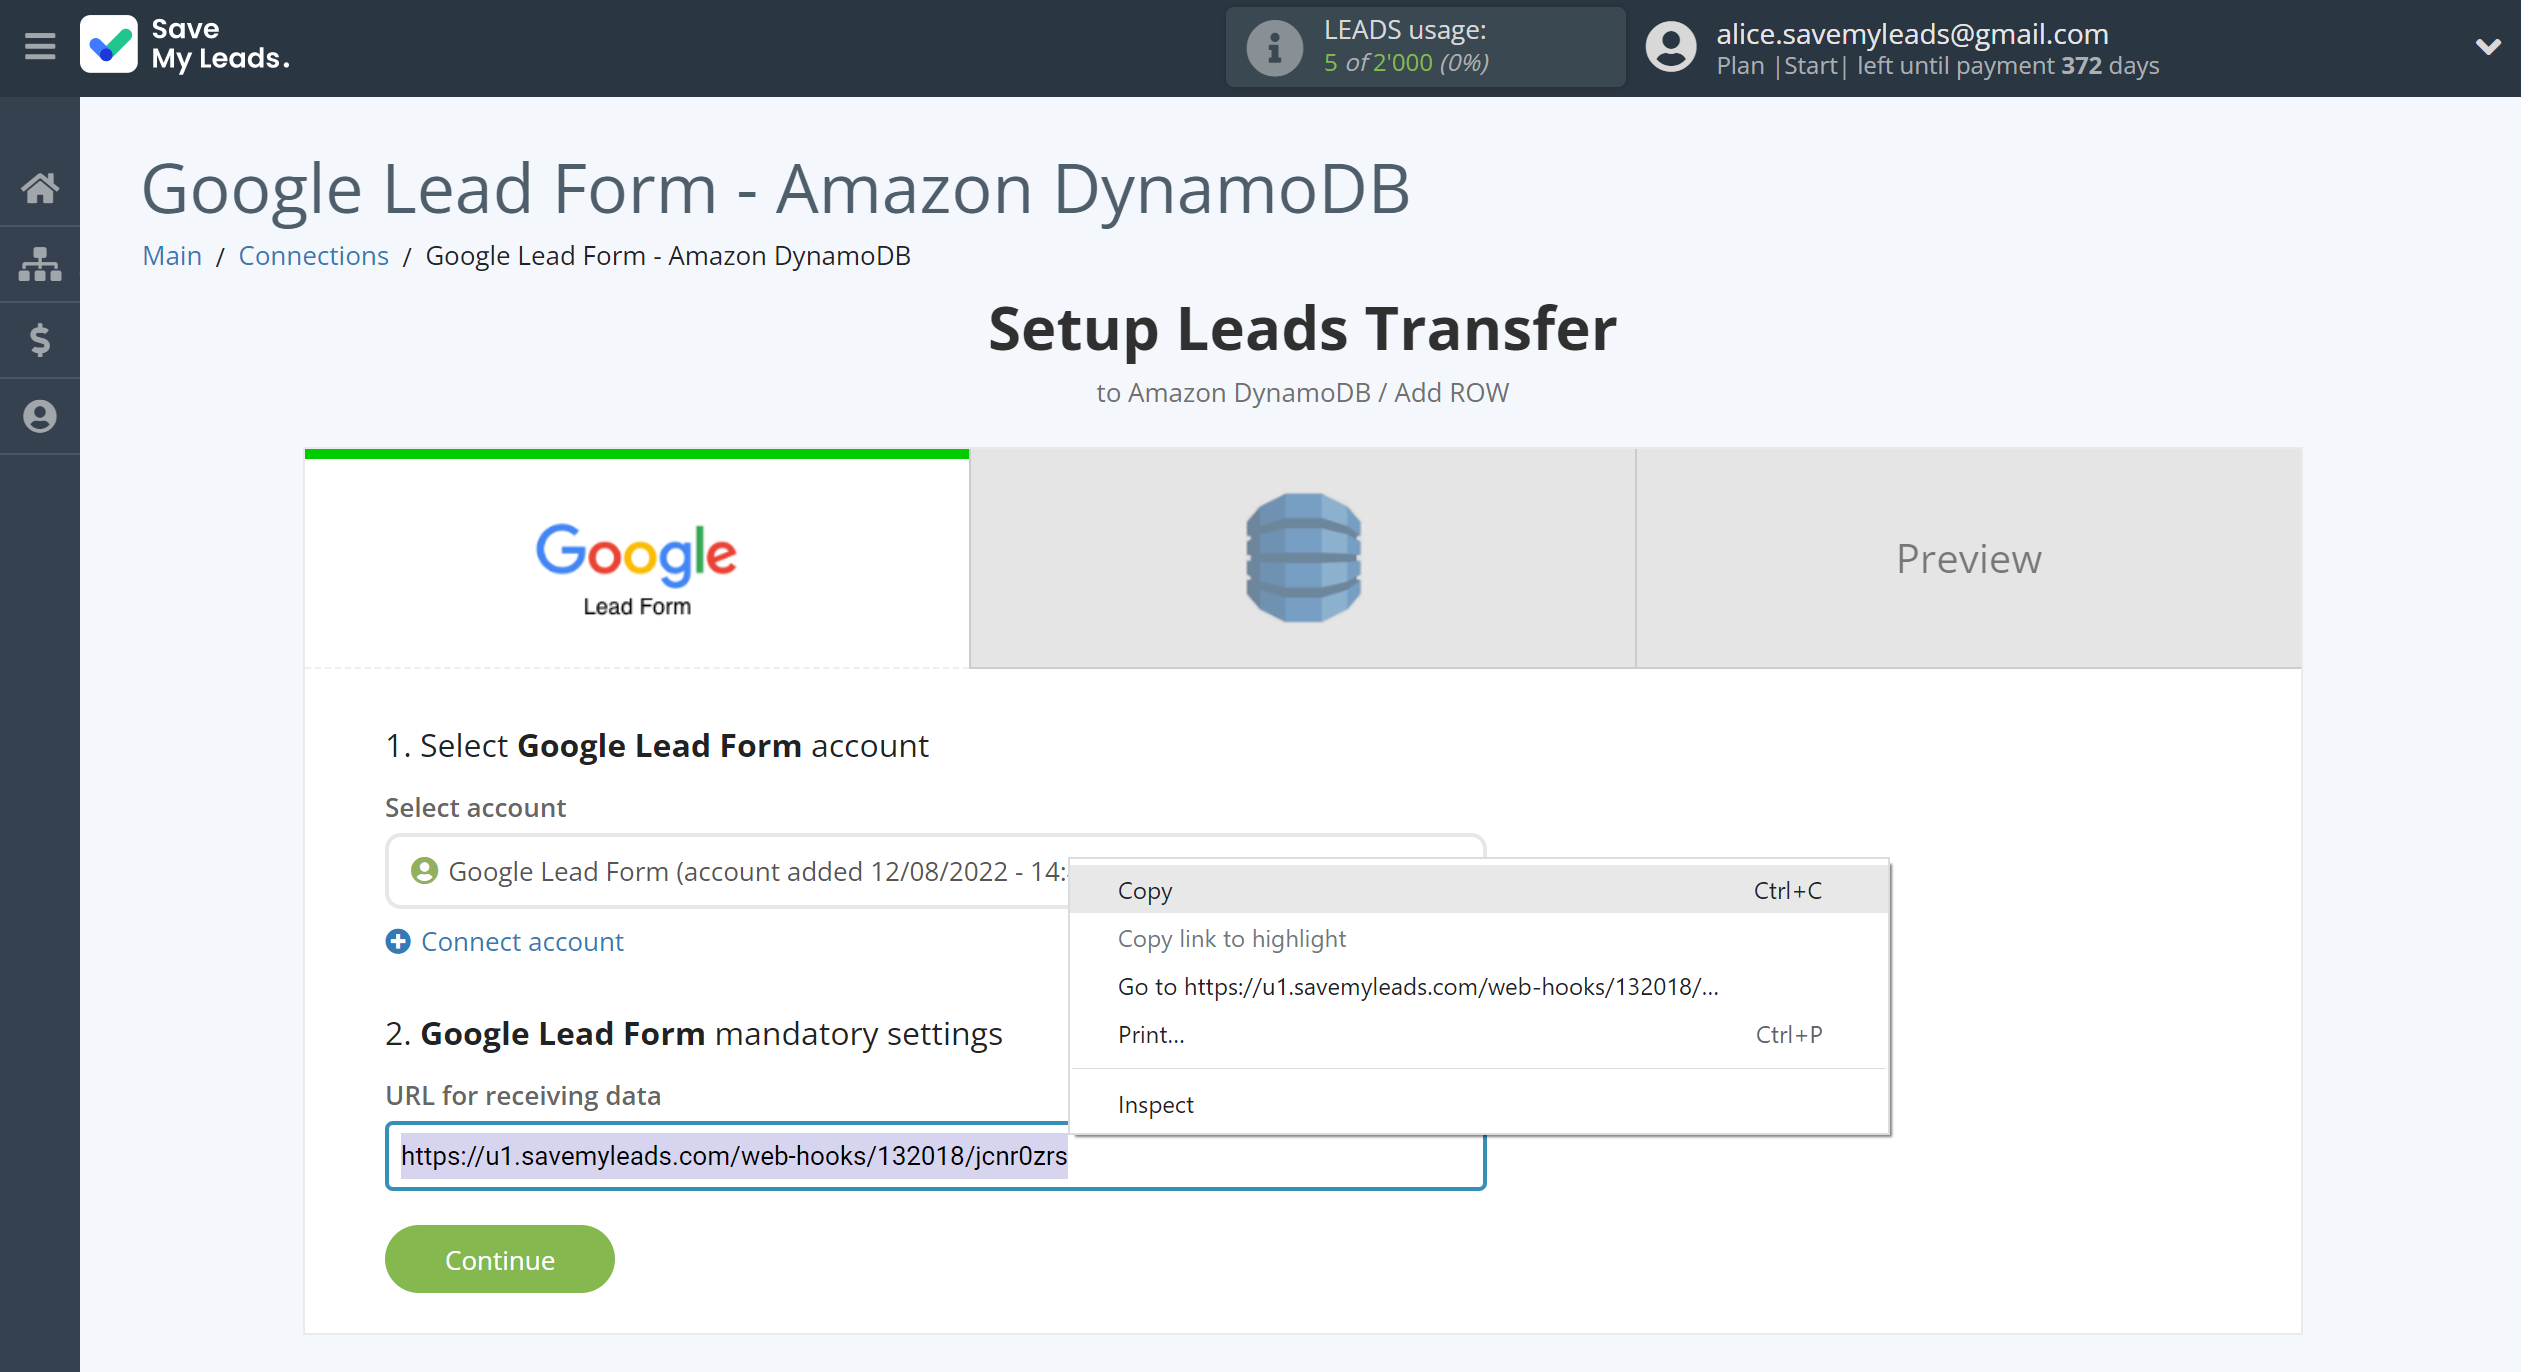 How to Connect Google Lead Form with Amazon DynamoDB | Data Source account connection